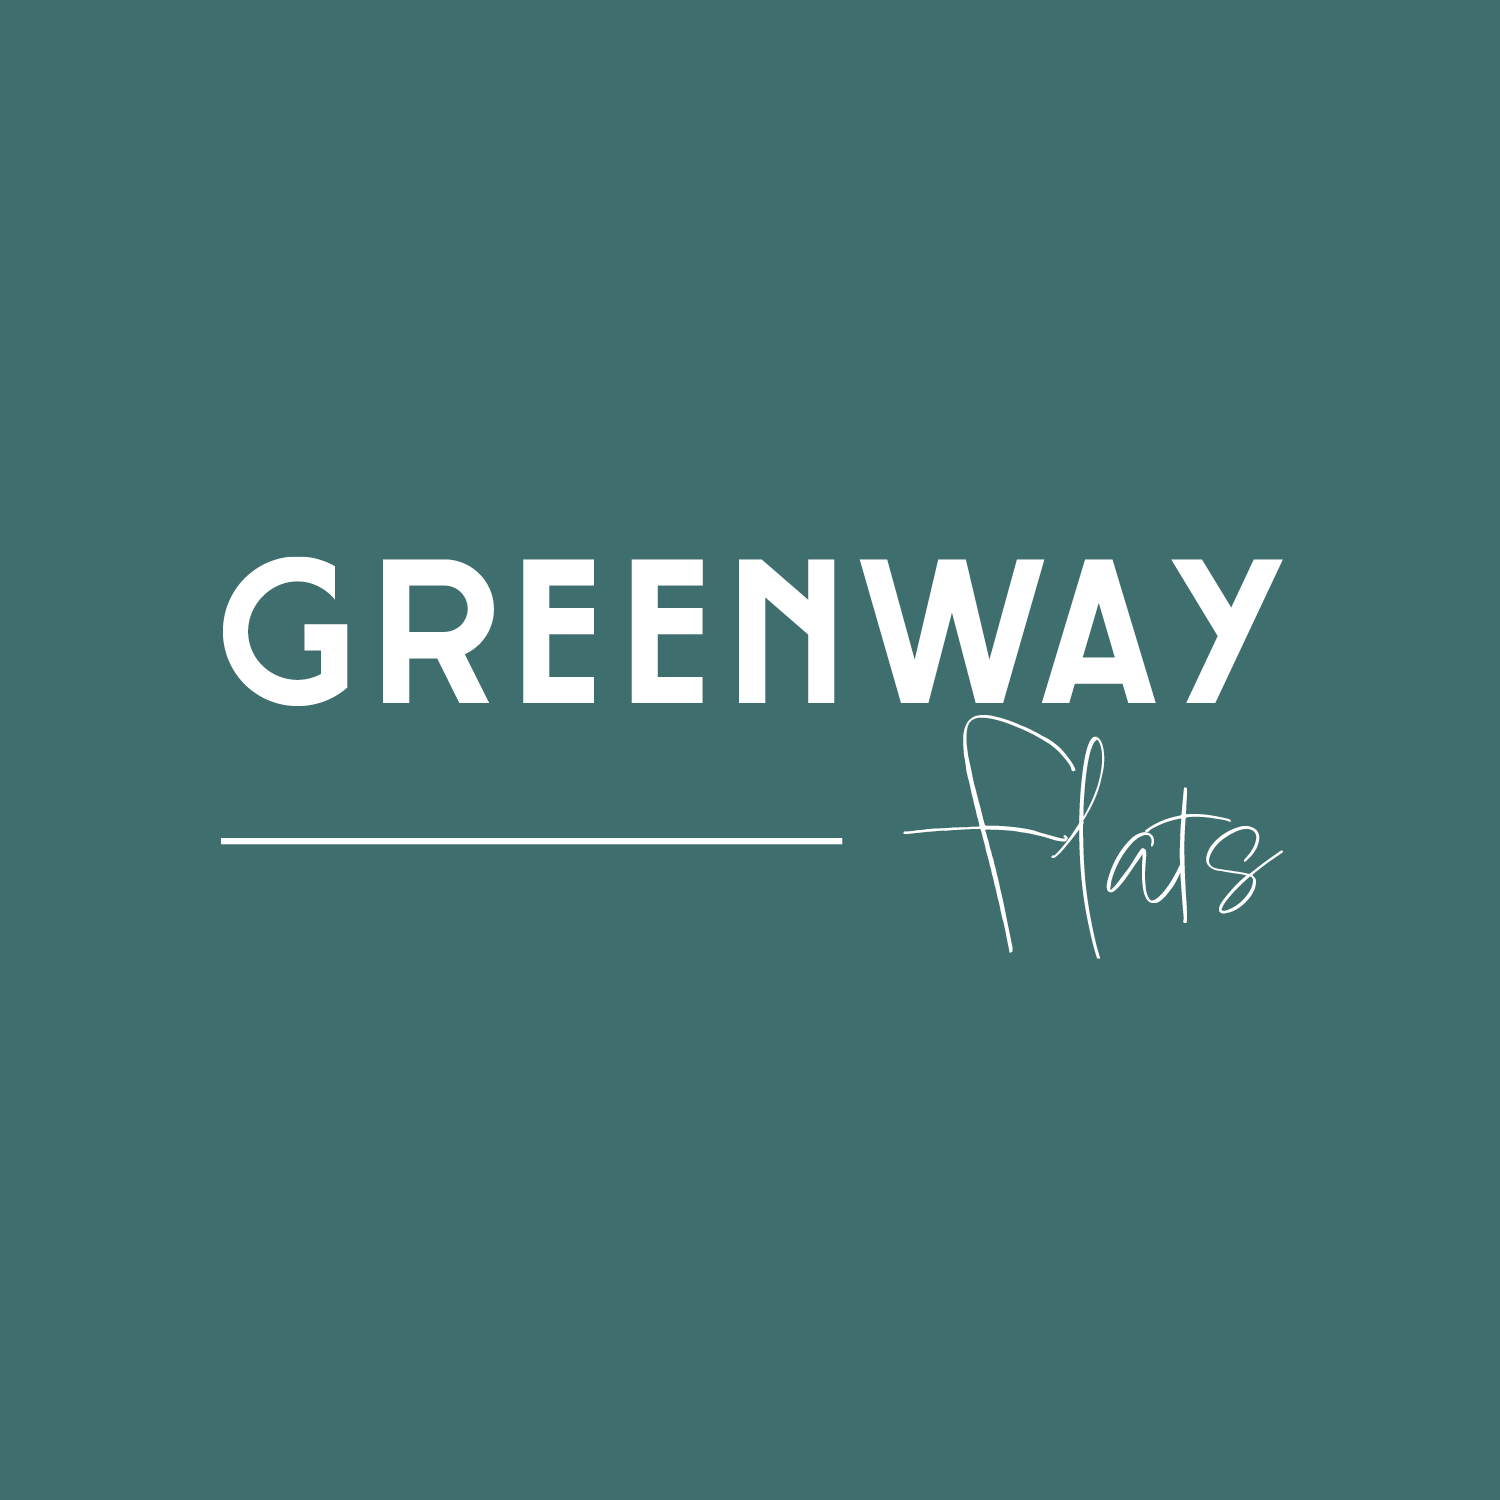 Greenway Flats - Fayetteville, AR 72703 - (479)485-0123 | ShowMeLocal.com